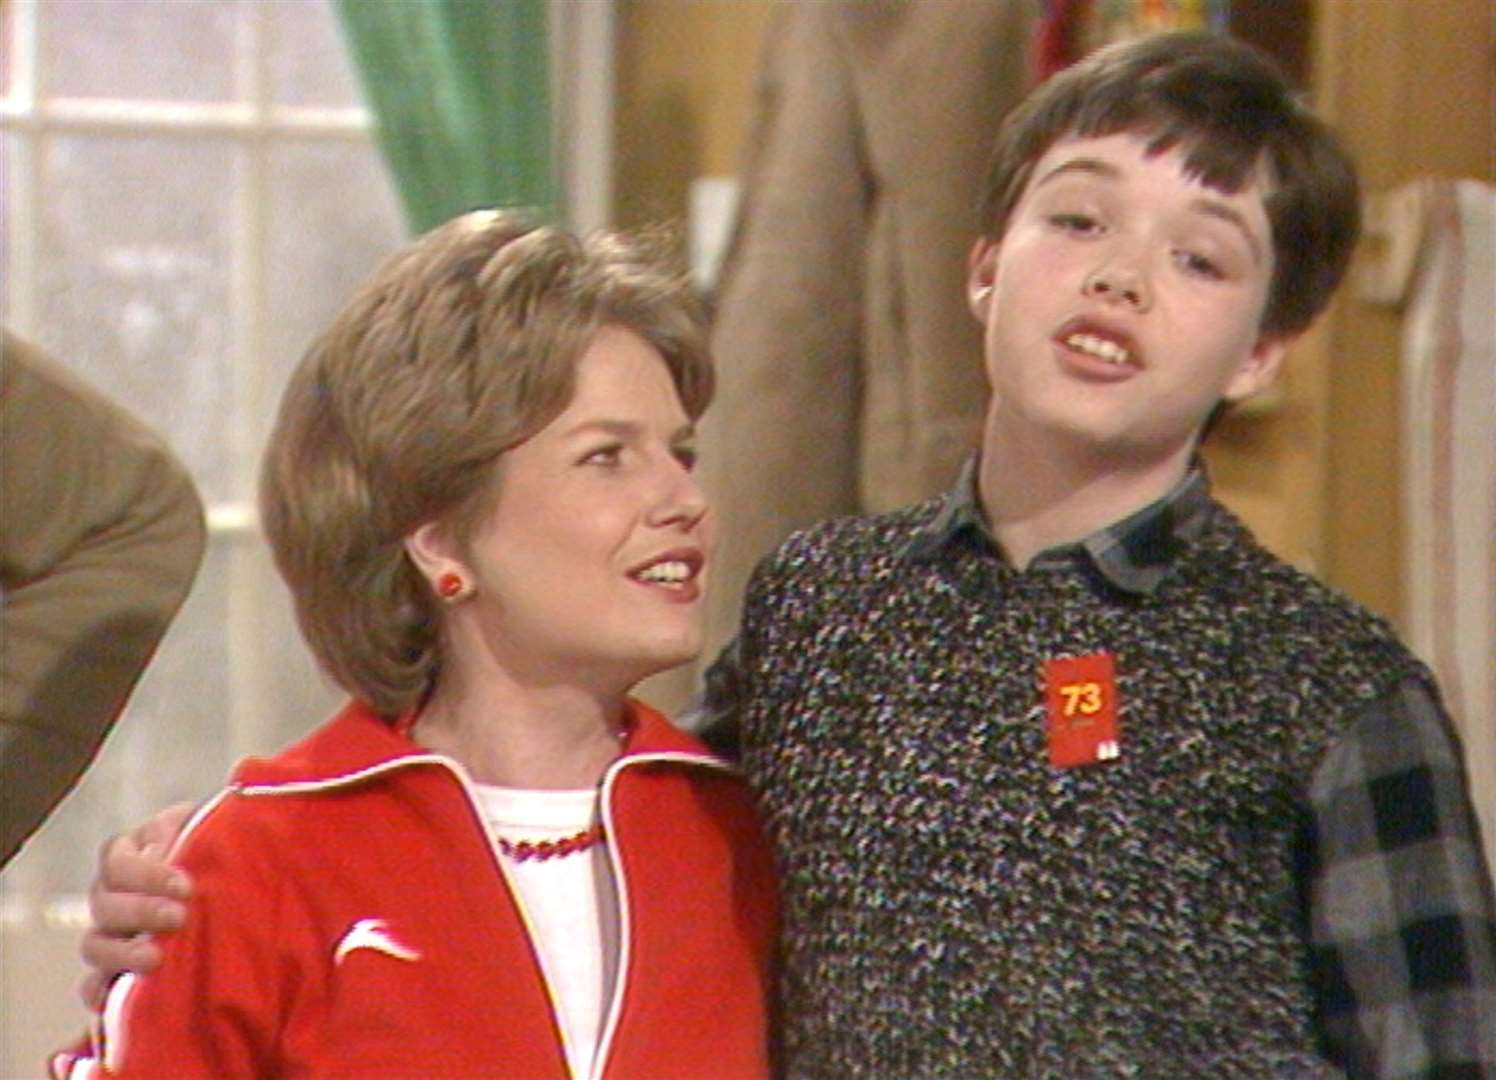 A young Sandi Toksvig and an even younger Nic Ayling introduce the Sandwich Quiz on Saturday morning children's show Number 73 made by TVS at Vinters Park studios, Maidstone